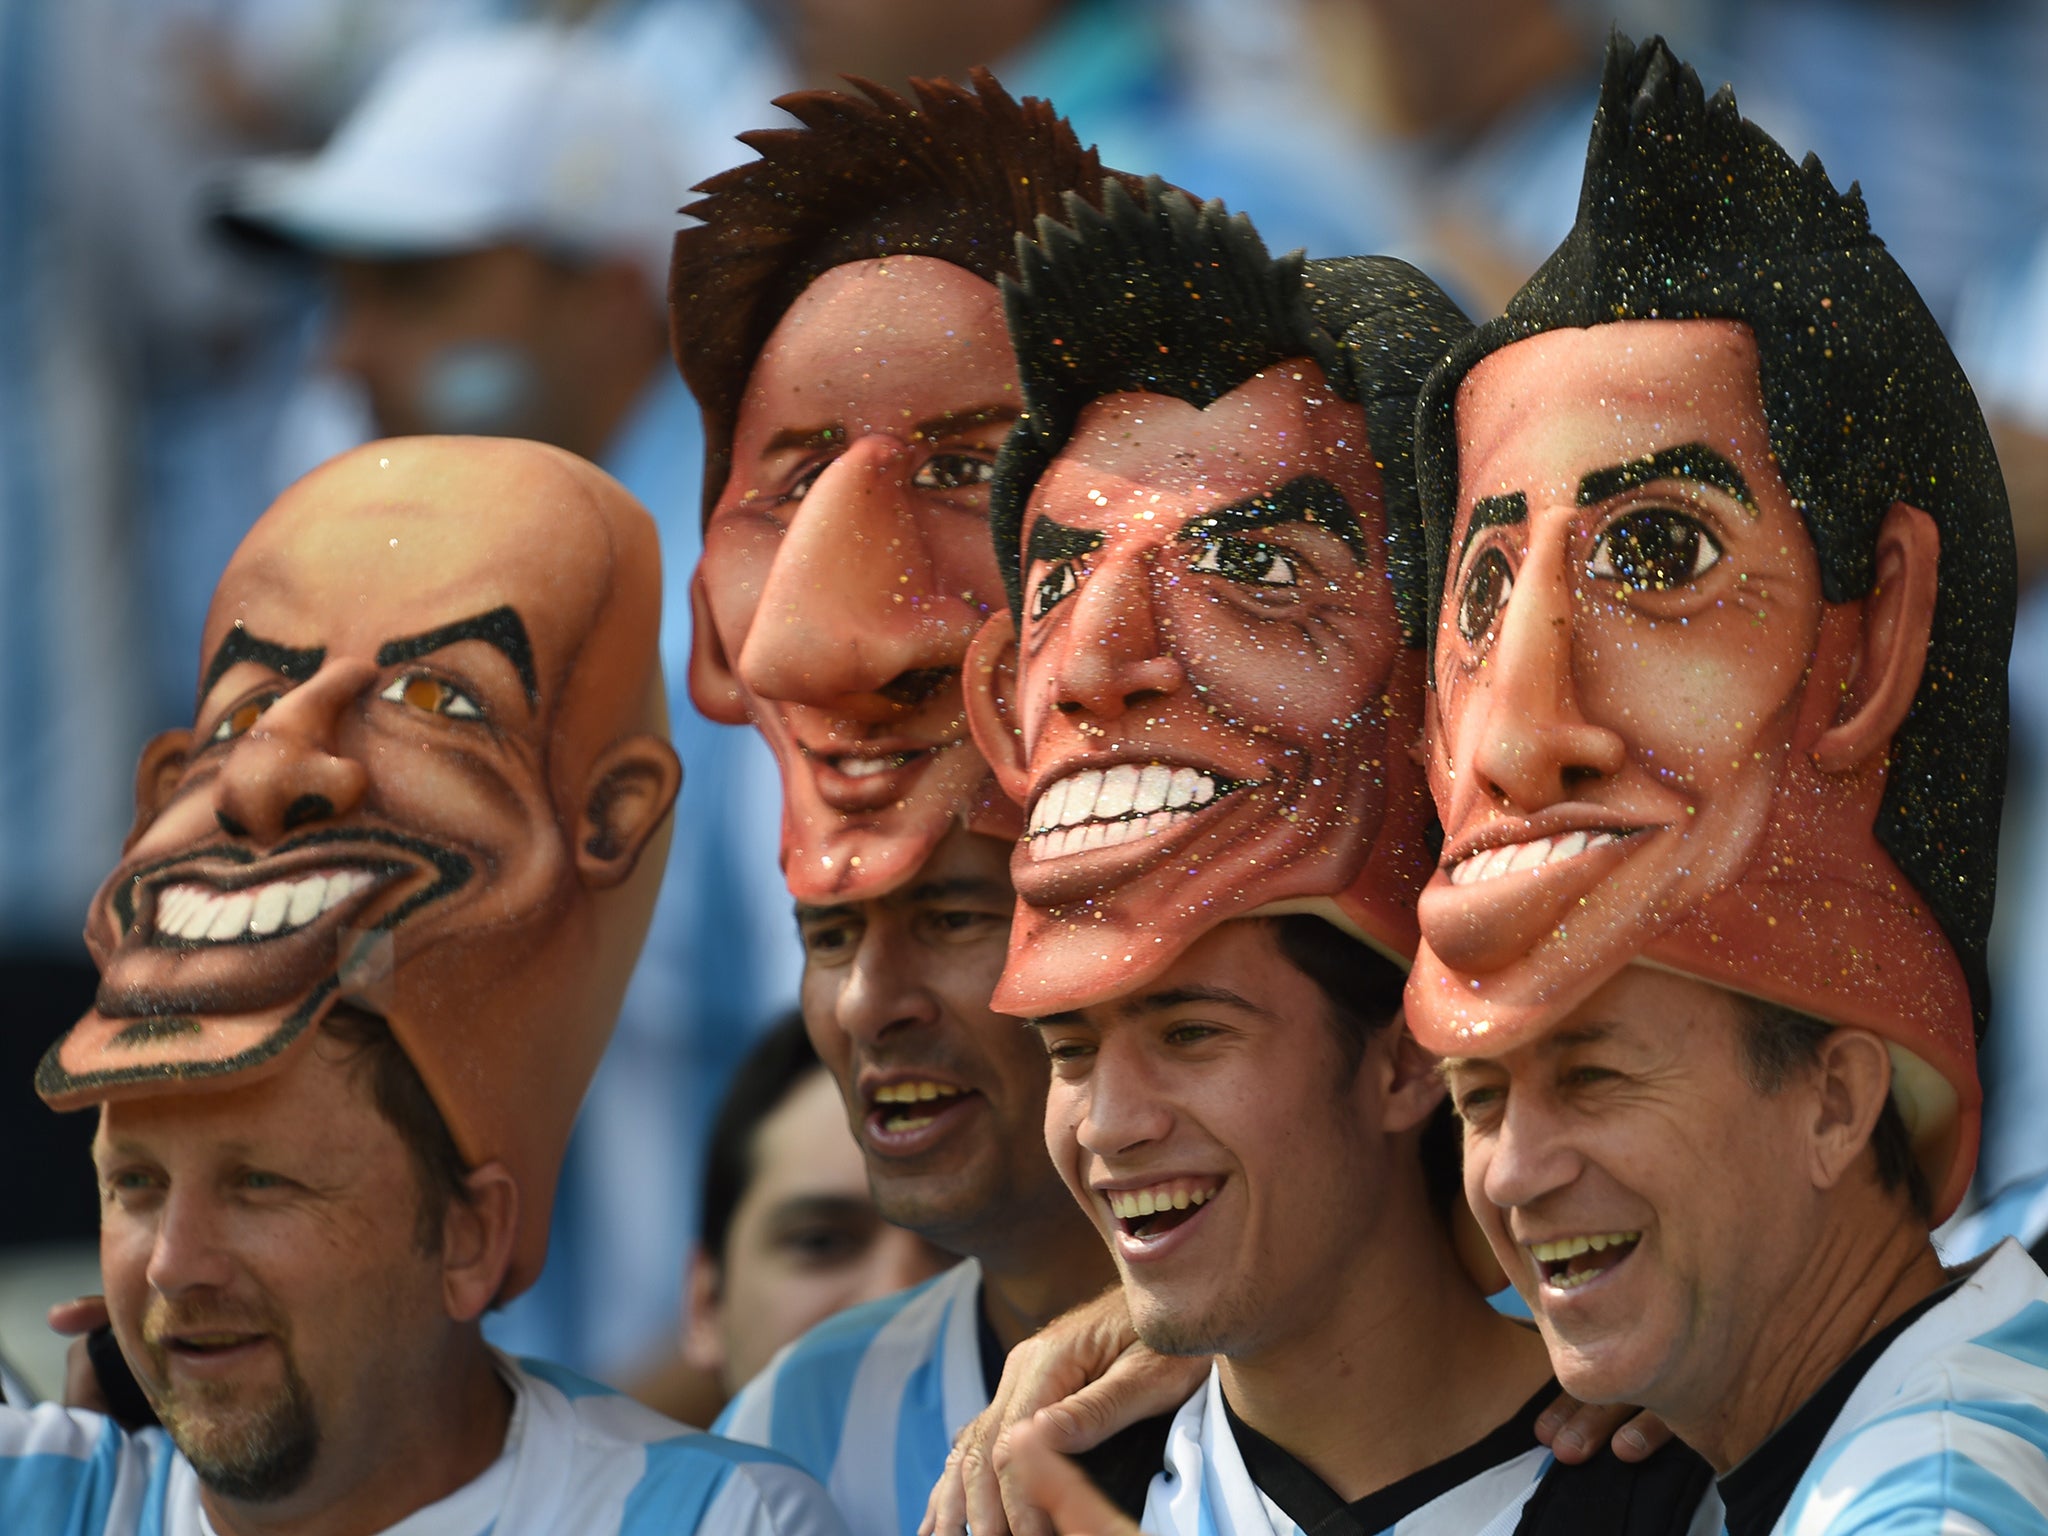 Argentina fans at the World Cup